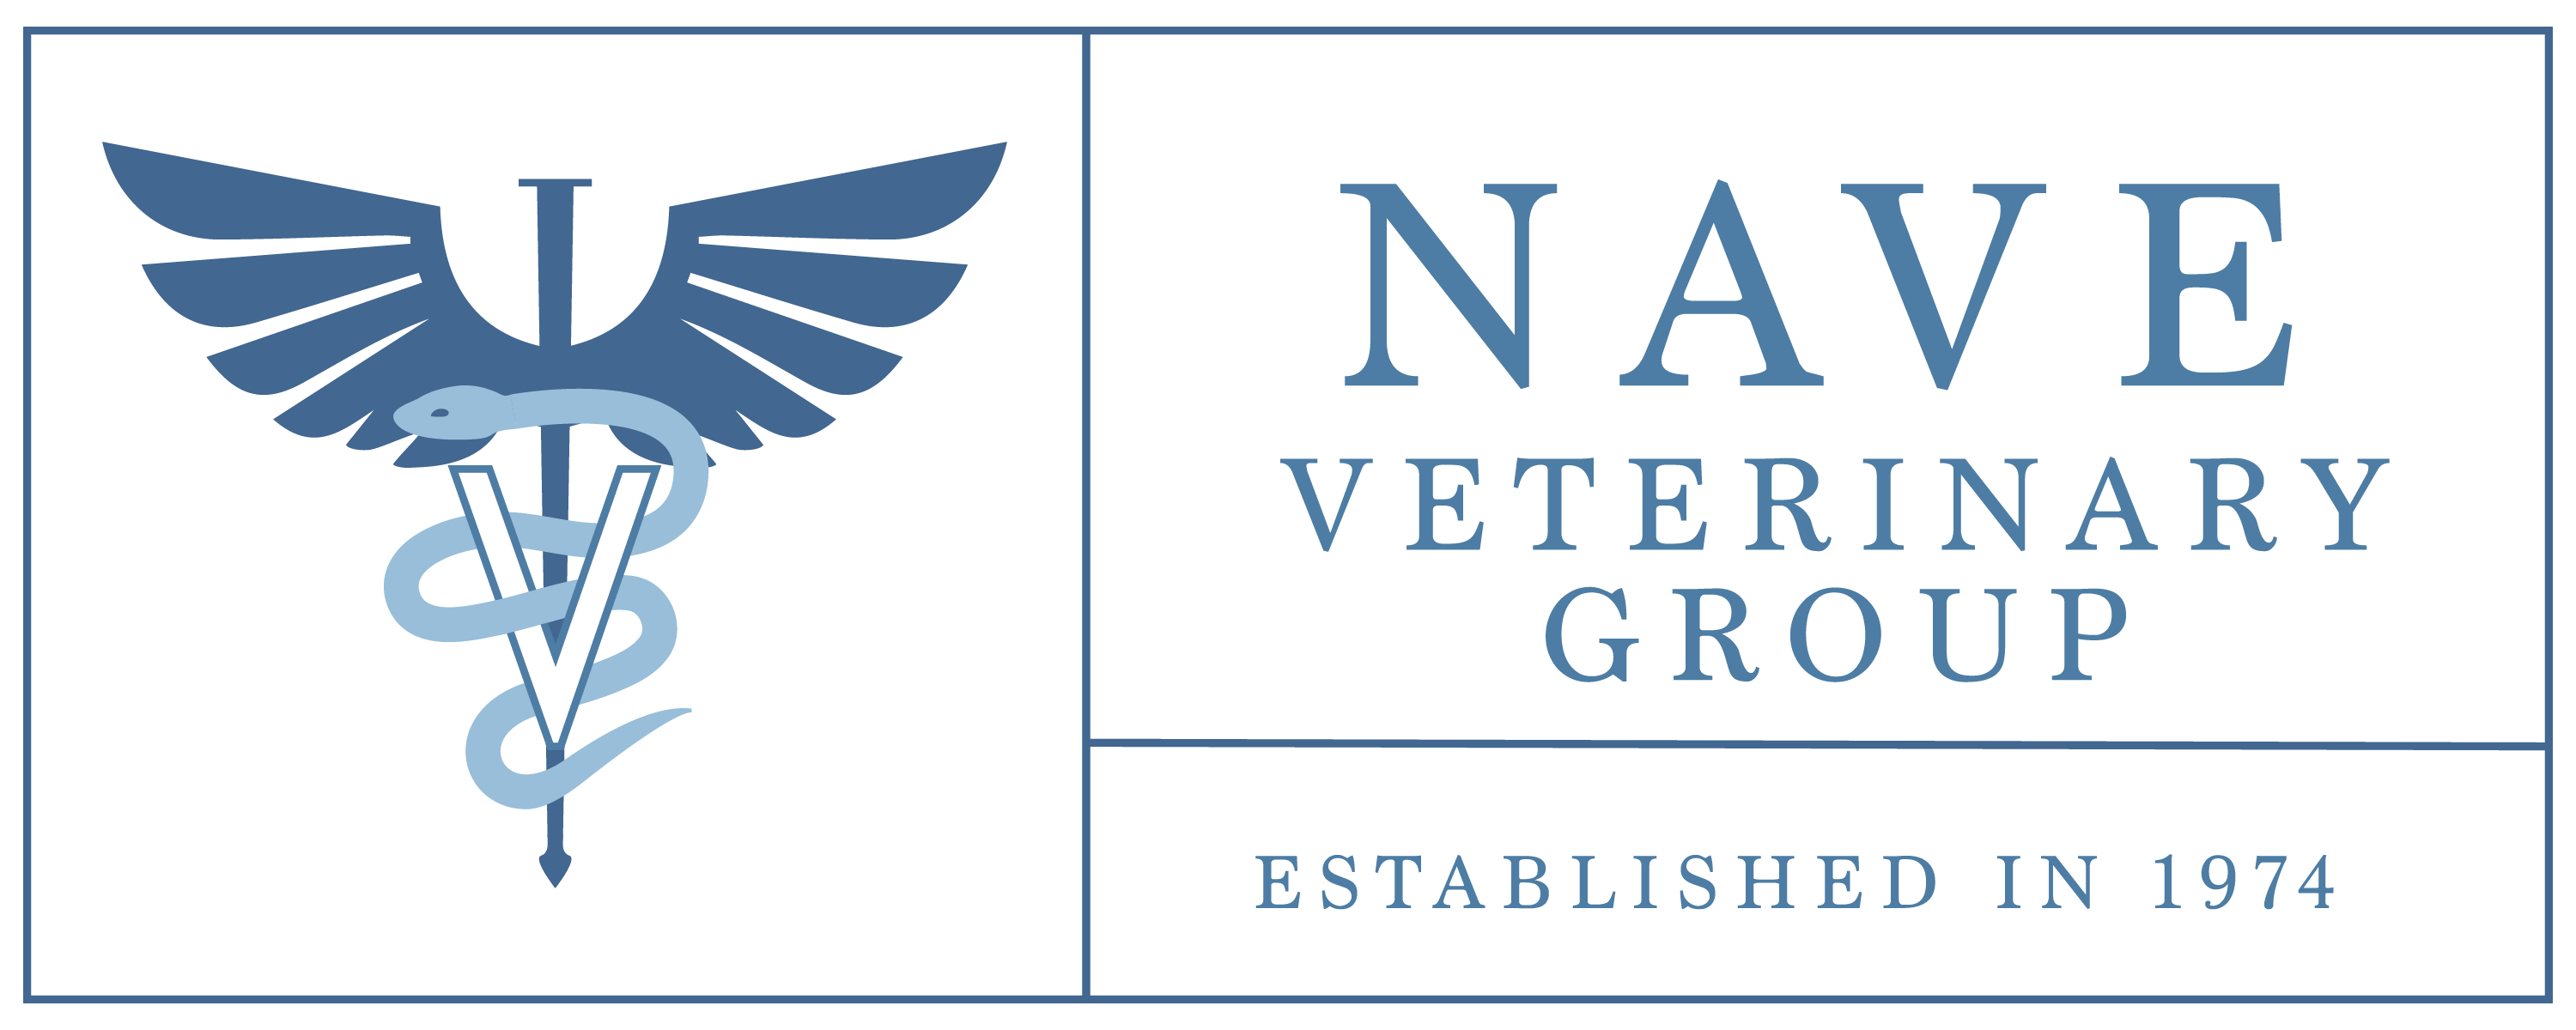 The Nave Veterinary Group